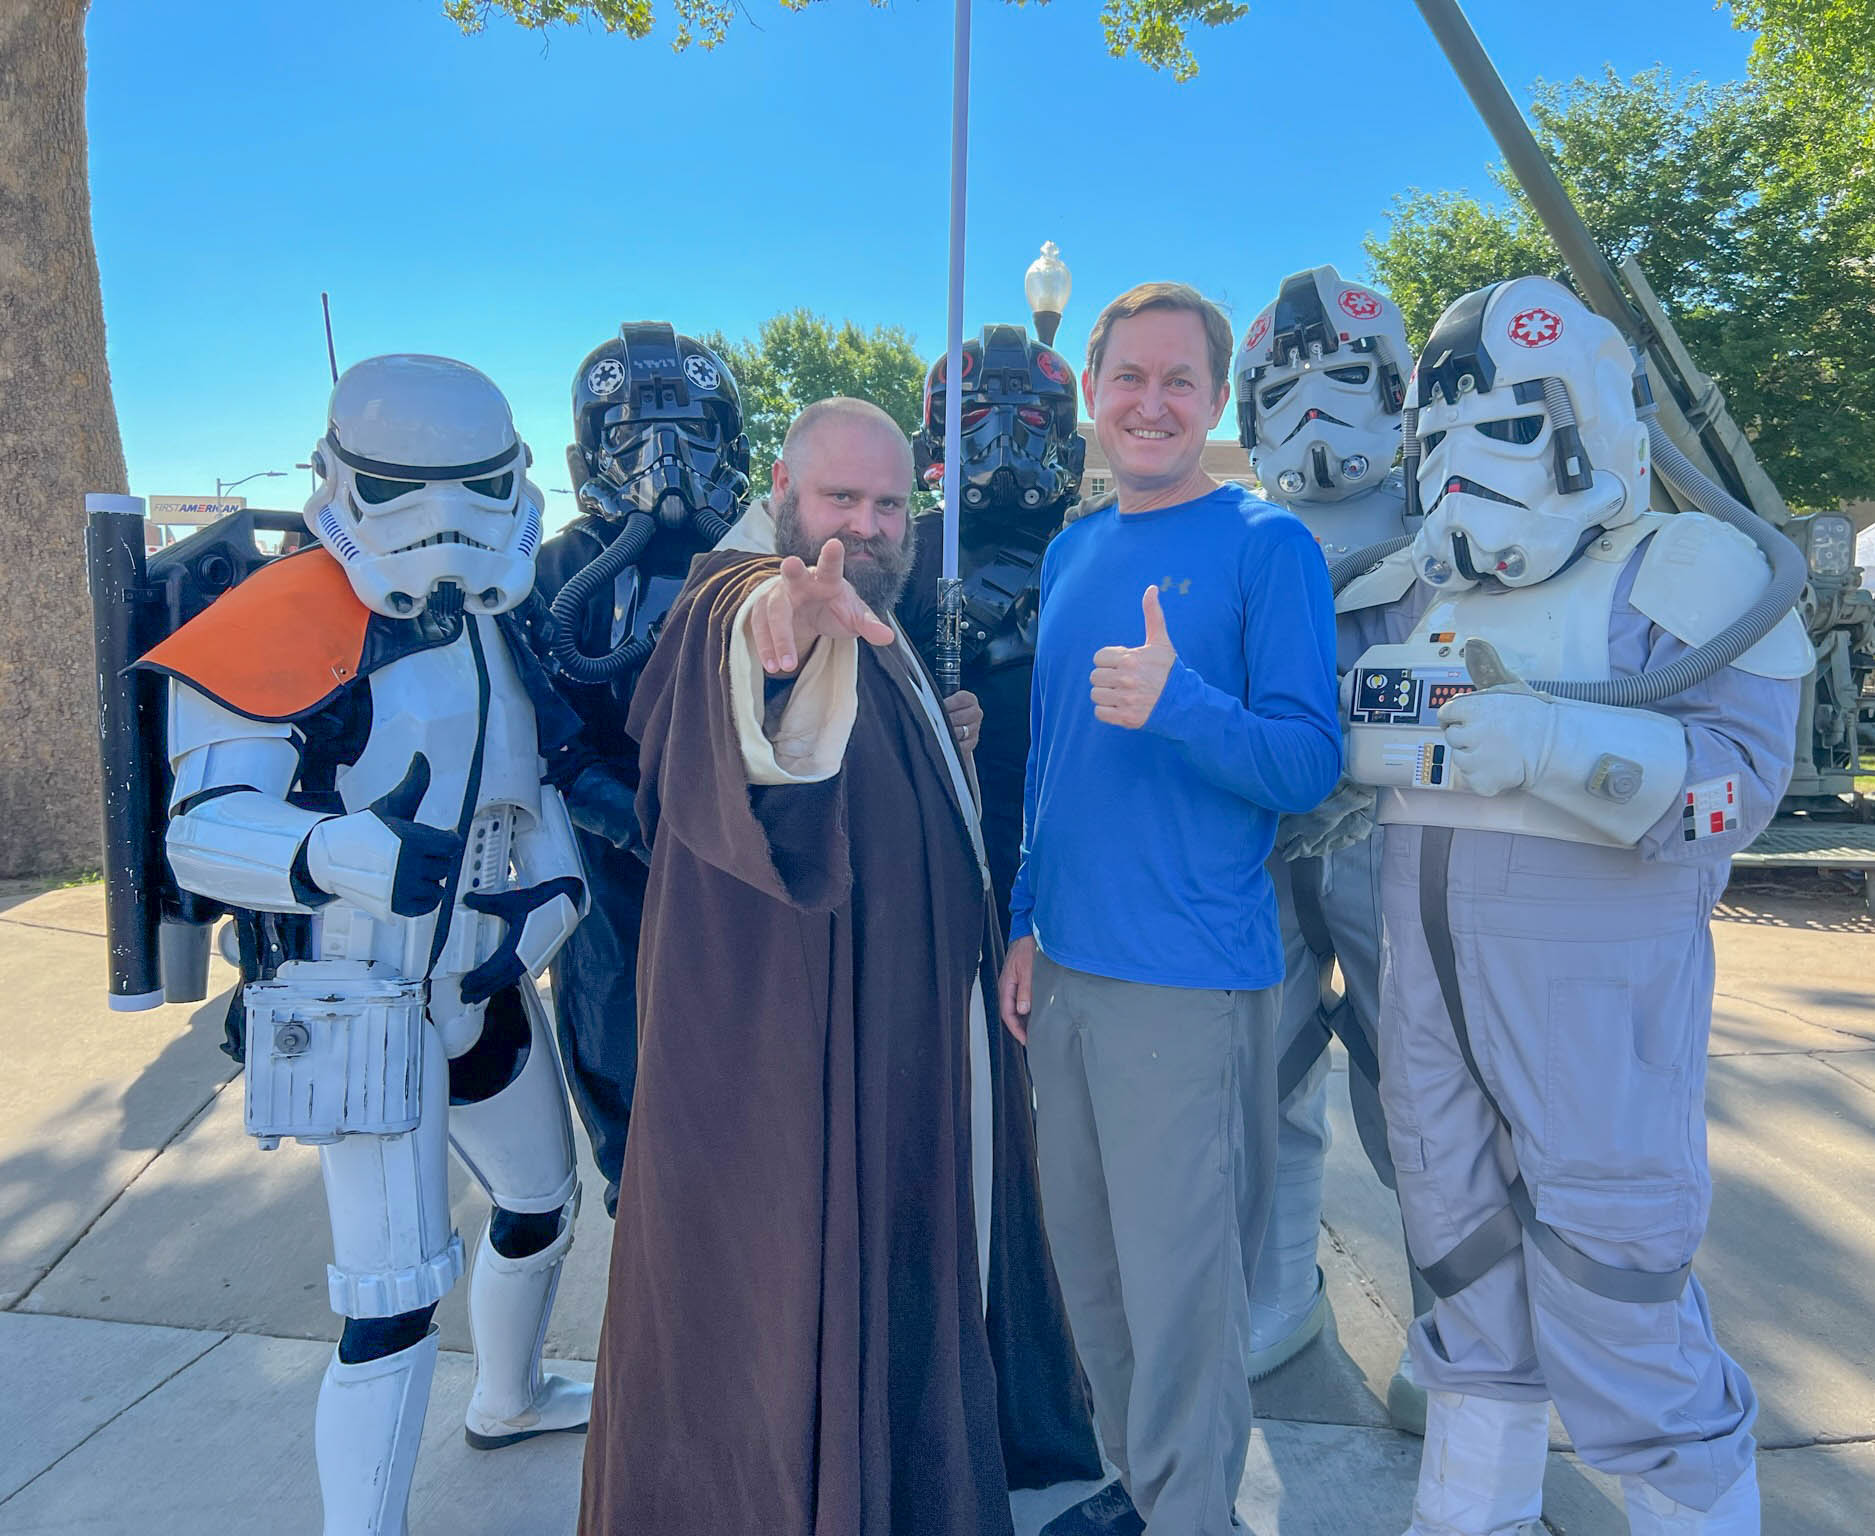 Meeting some visitors from a galaxy far, far away at the Roswell UFO Festival